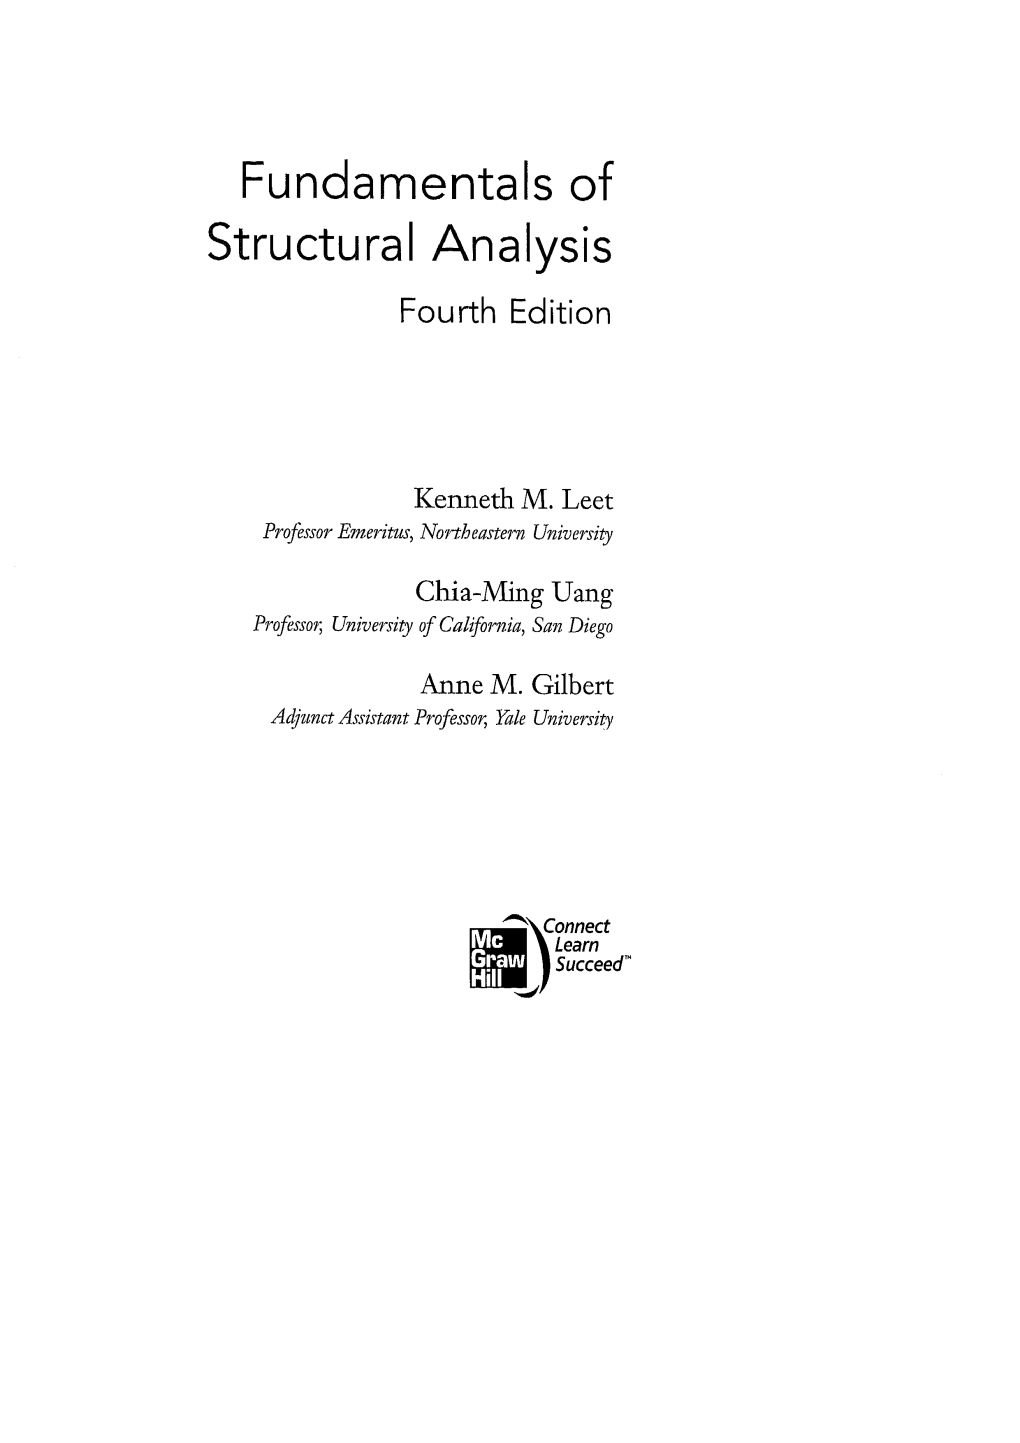 Structural Analysis Fourth Edition